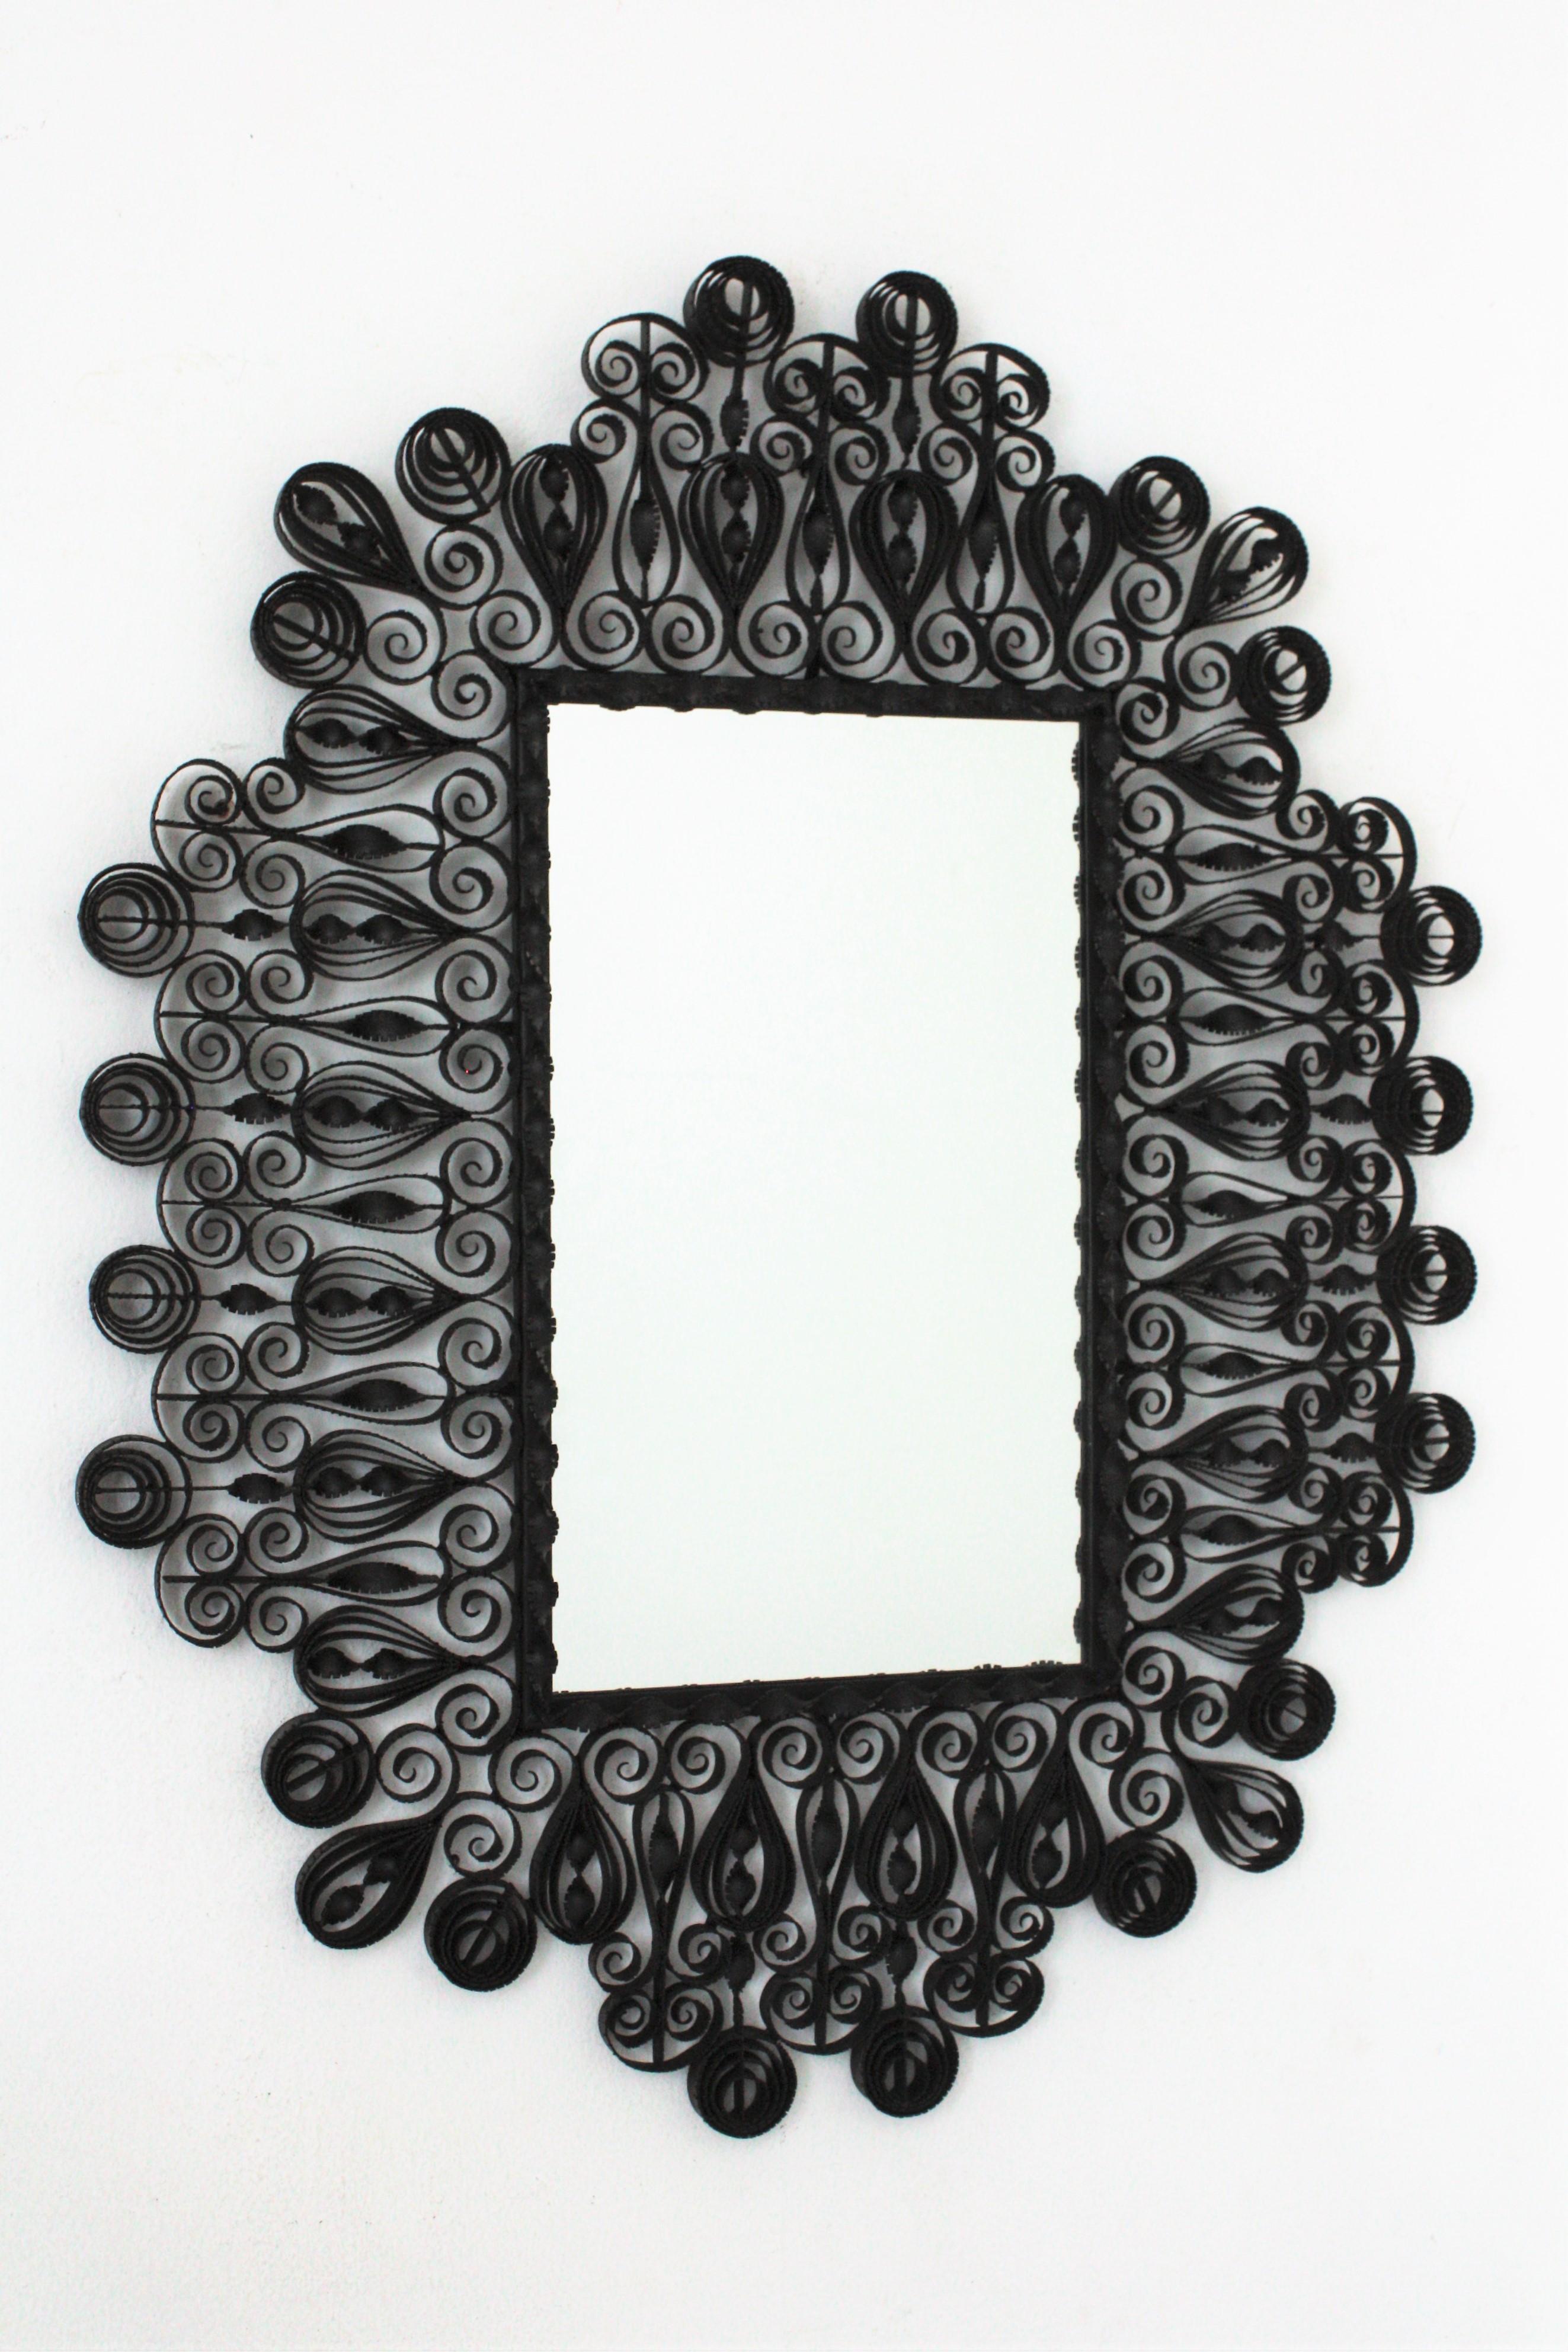 Impressive ornamented scrolled and twisted wrought iron rectangular mirror with Gothic style accents. Spain, 1940s.
This handcrafted mirror was manufactured in Spain at the Mid-Century Modern period. The frame is heavily decorated with hand-hammered